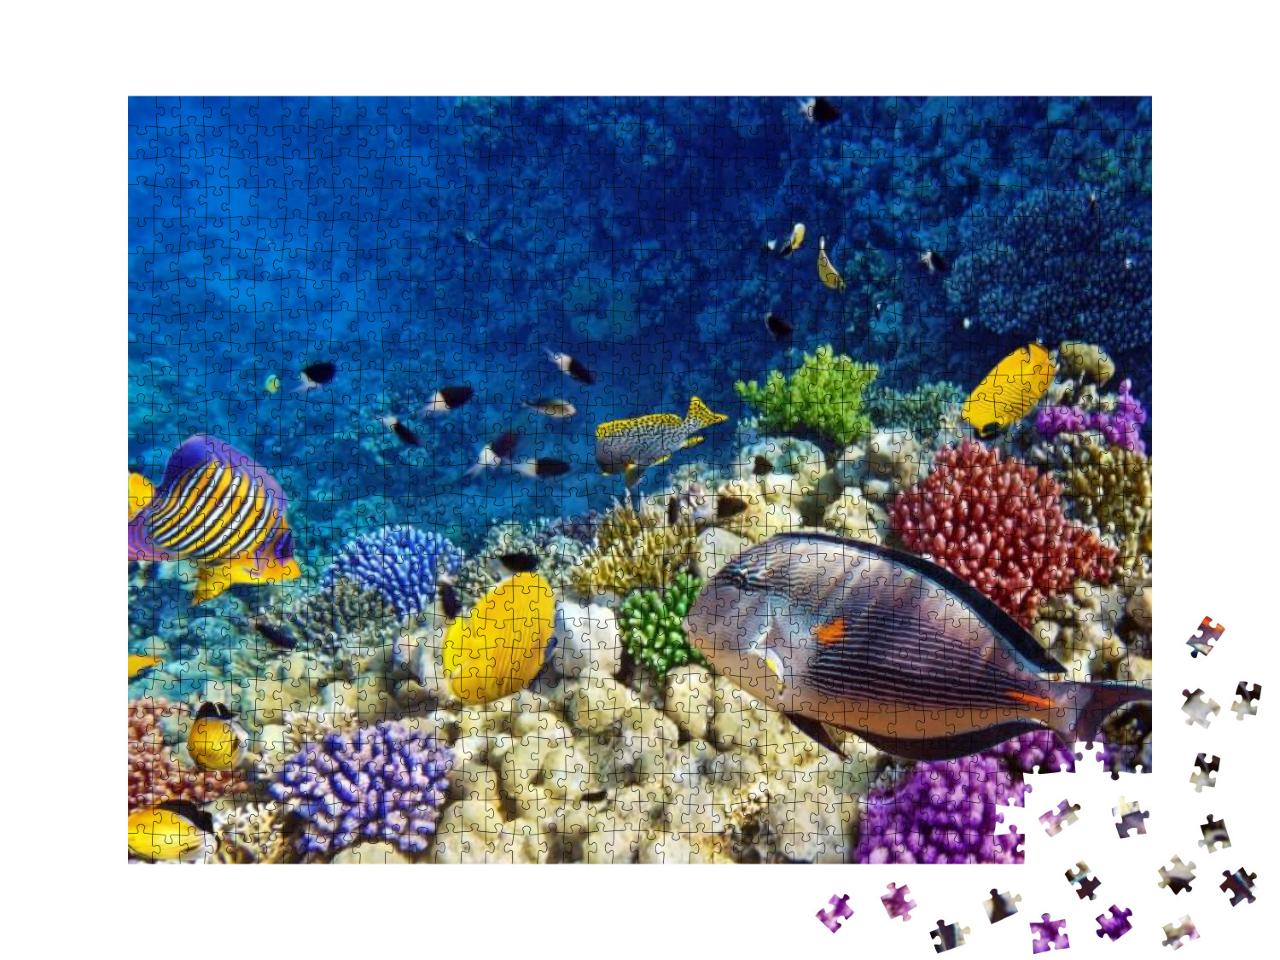 Coral & Fish in the Red Sea. Egypt... Jigsaw Puzzle with 1000 pieces